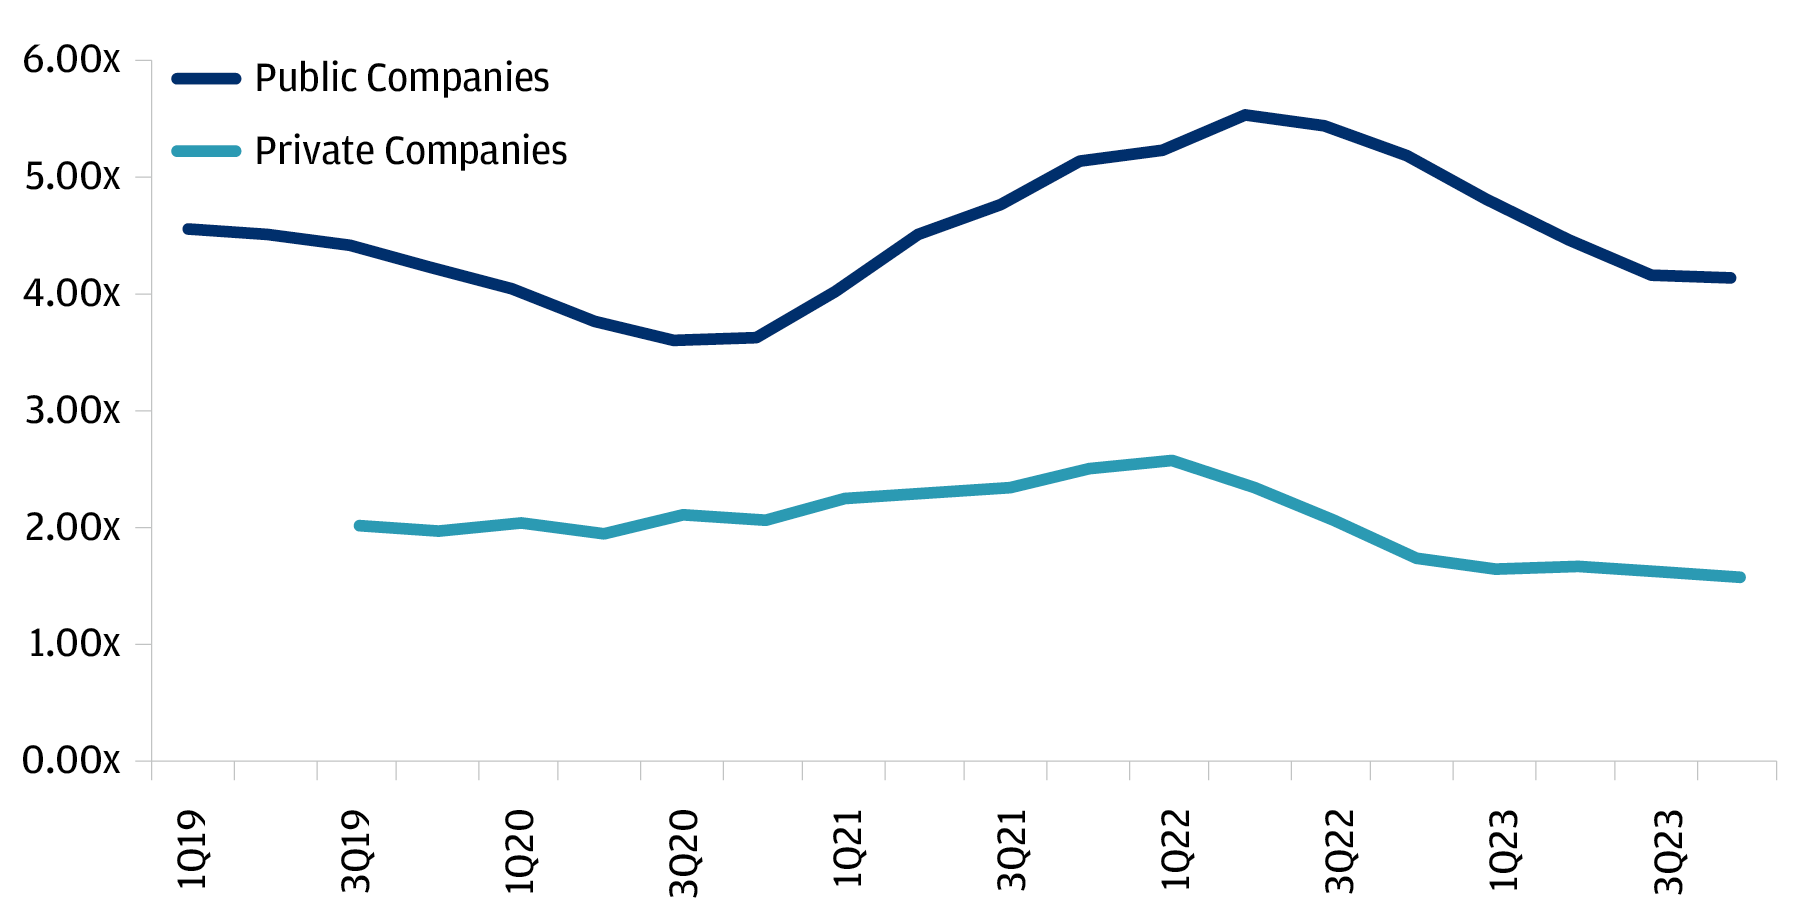 This shows interest coverage ratios (EBITDA to net interest expense) for the broadly syndicated loan market, separating public companies from private companies since 1Q 2019.